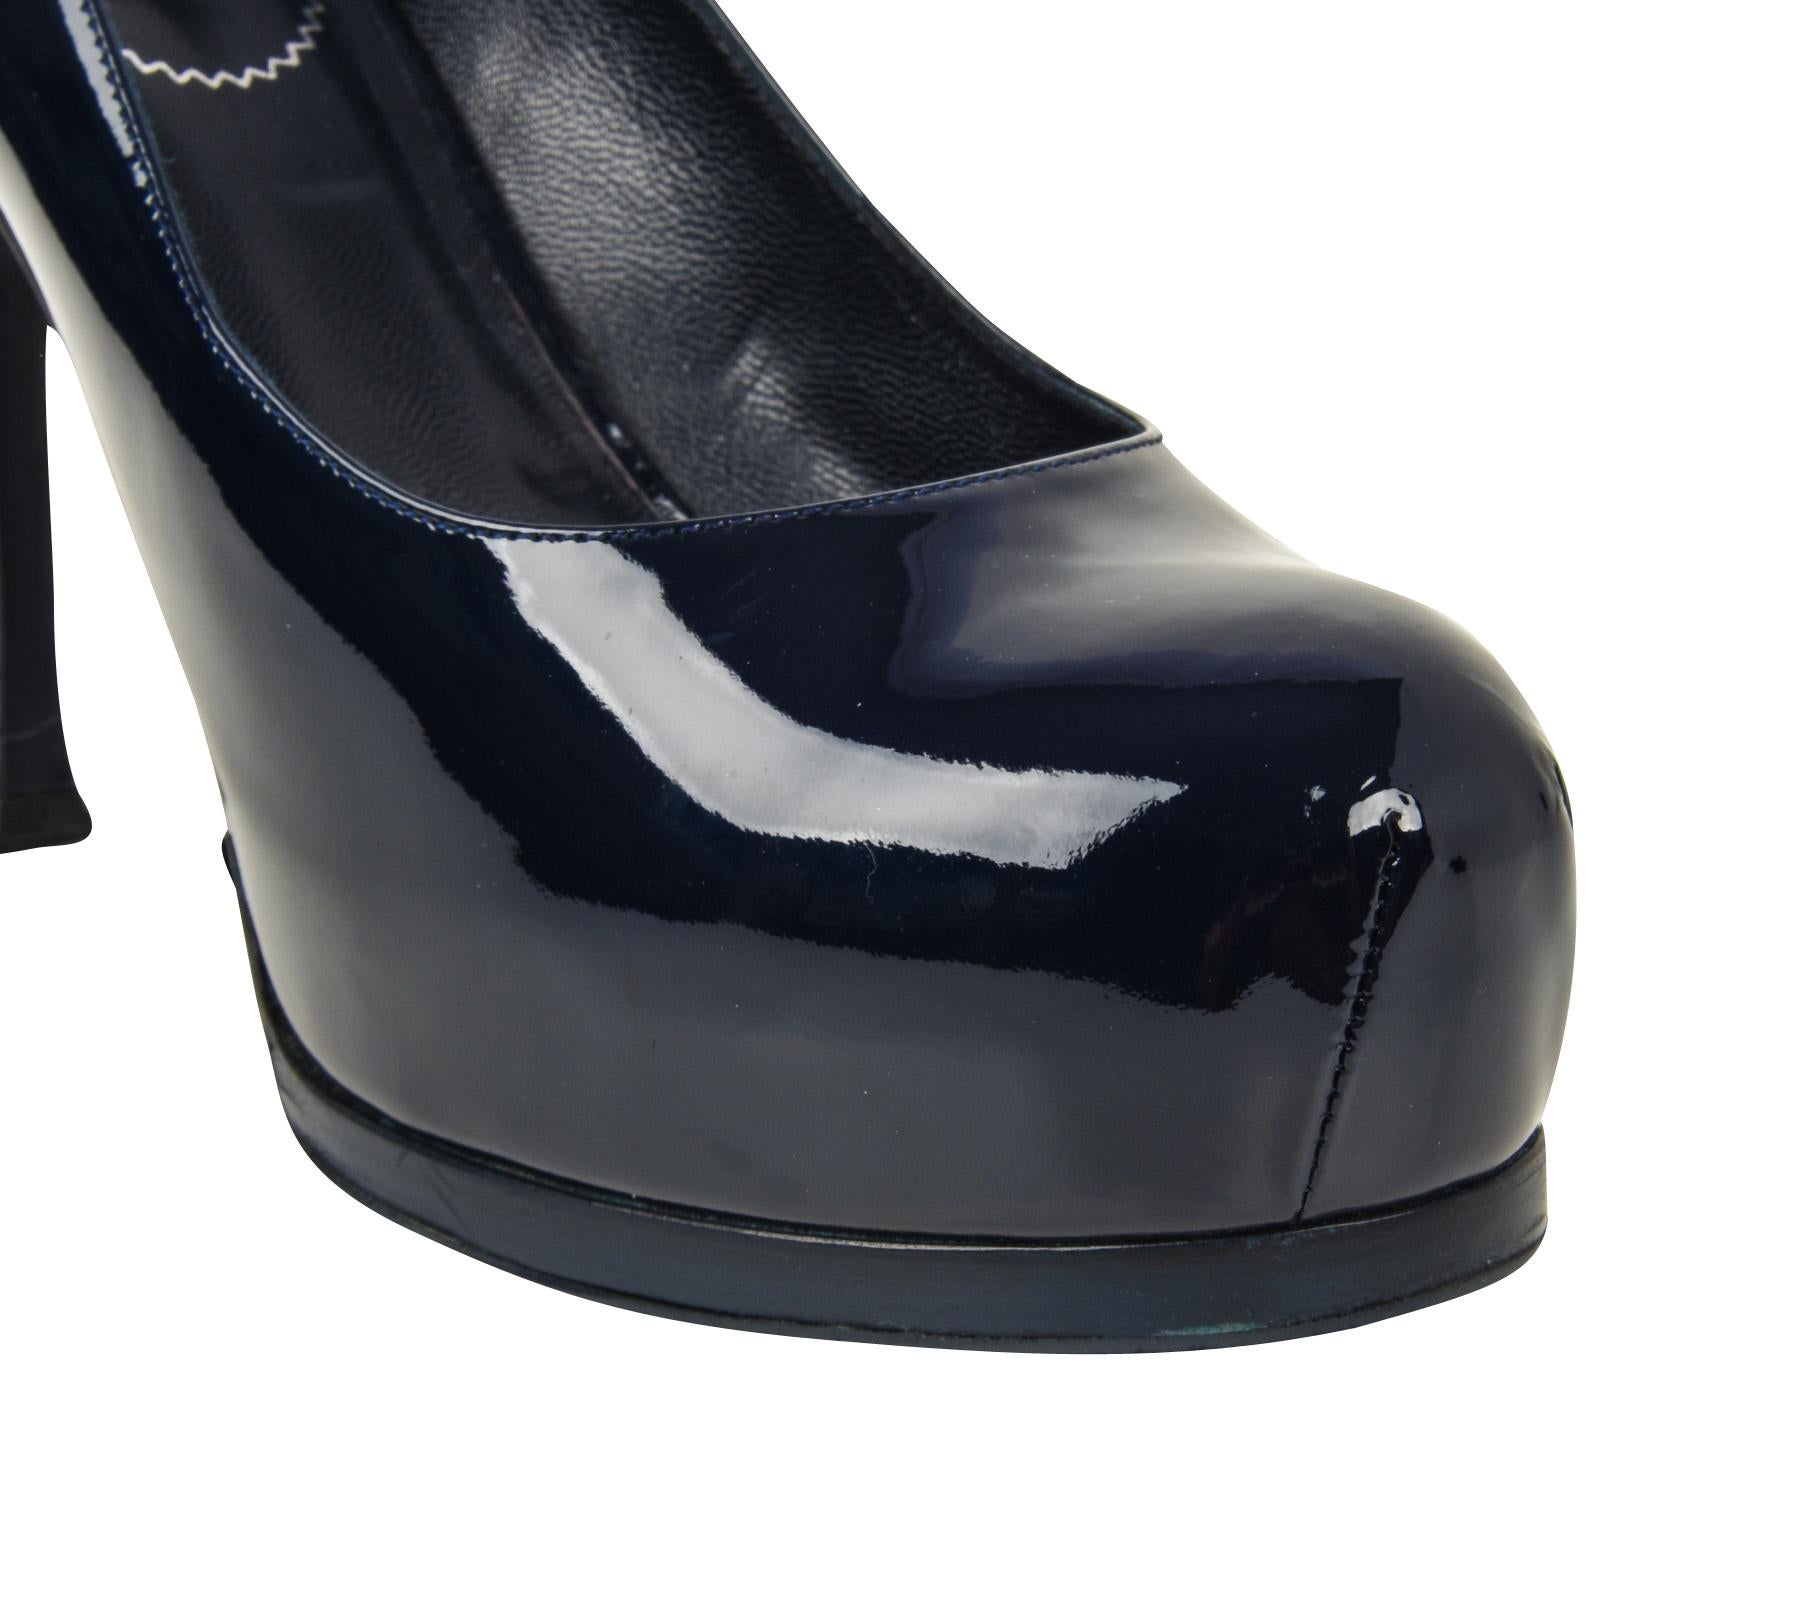 Guaranteed authentic YSL Saint Laurent navy blue patent leather Tribute pump.
Hidden platform and gently rounded toe.
A classic shoe in a classic color.
NEW or NEVER WORN.
final sale

SIZE  39
USA  9.5

SHOE MEASURES:
Heel  4.25